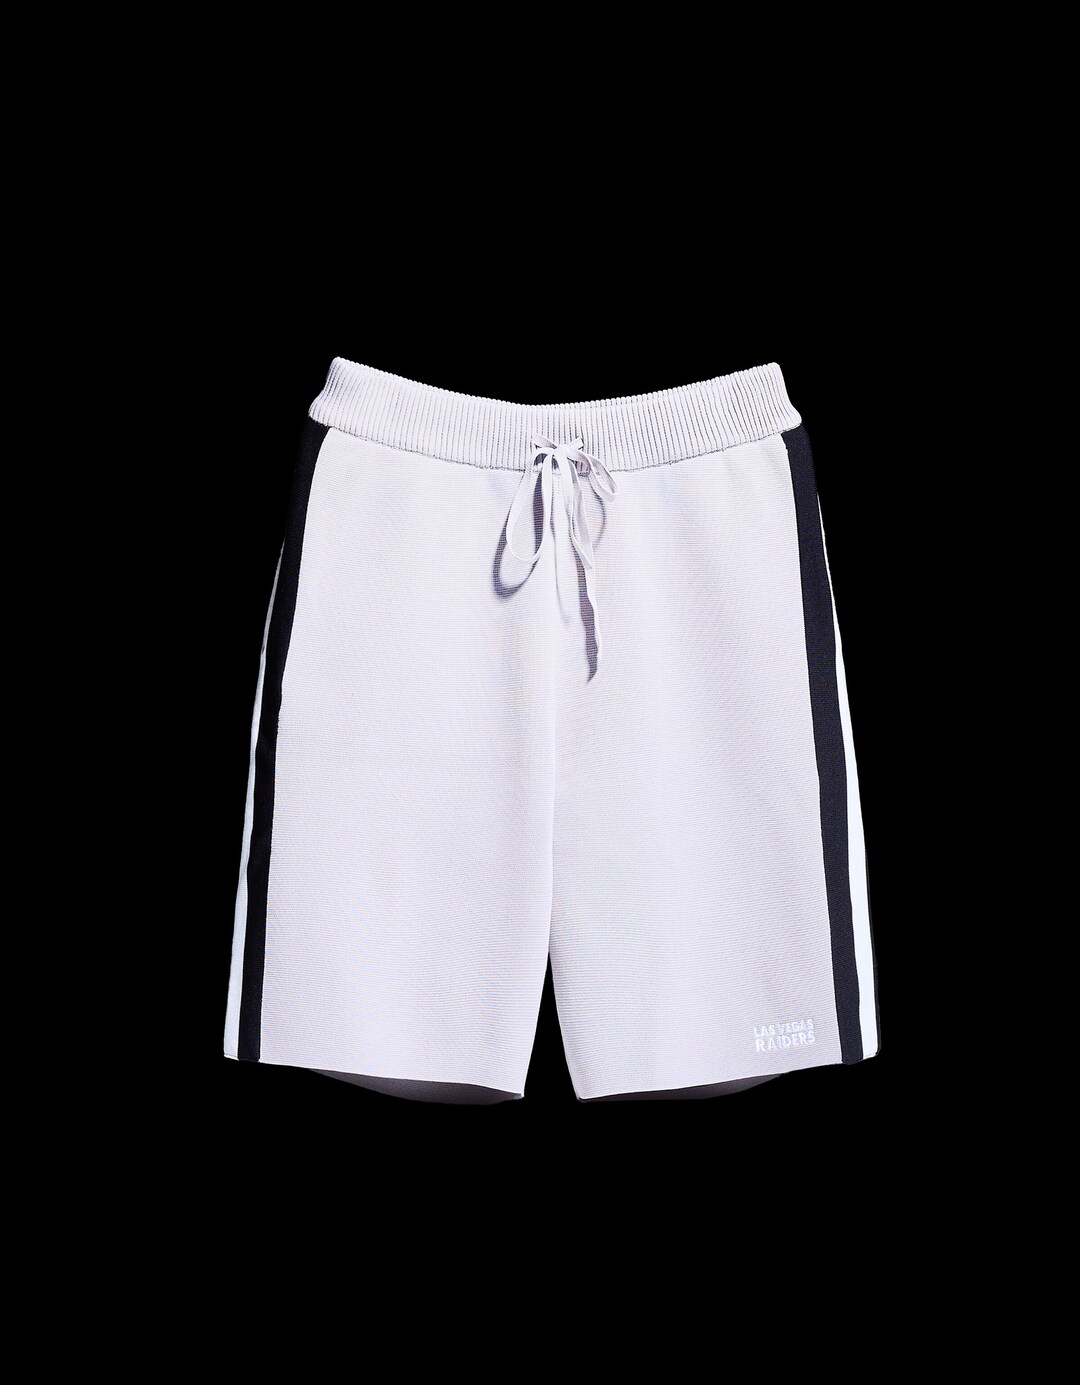 NFL printed Bermuda shorts with embroidery